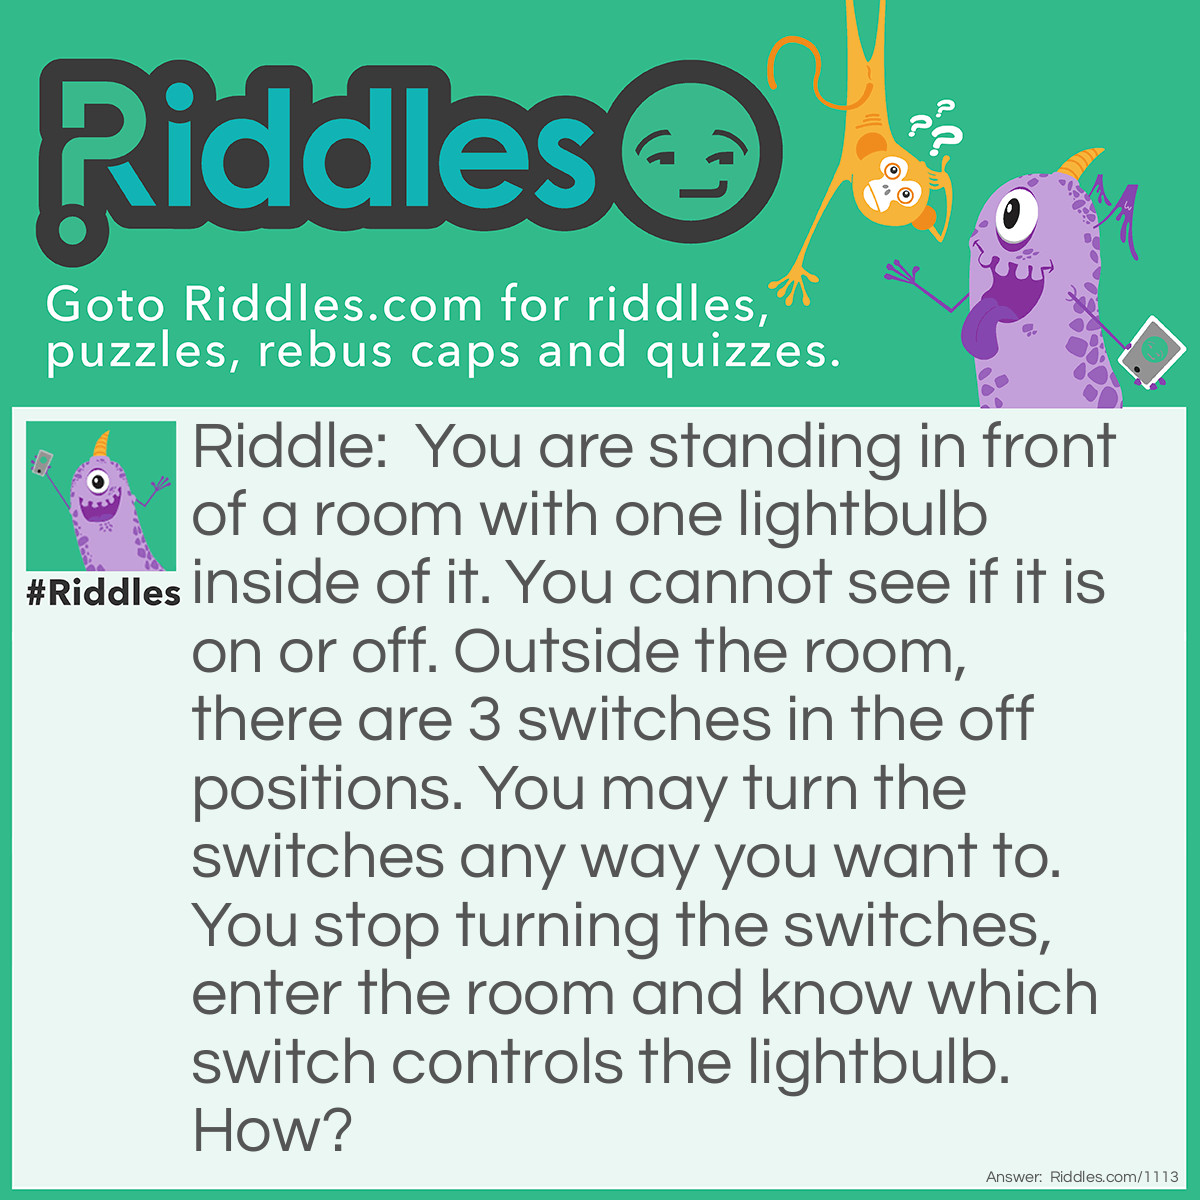 Riddle: You are standing in front of a room with one lightbulb inside of it. You cannot see if it is on or off. Outside the room, there are 3 switches in the off positions. You may turn the switches any way you want to. You stop turning the switches, enter the room and know which switch controls the lightbulb. How? Answer: You turn 2 switches "on" and leave 1 switch "off" and wait about a minute. Then enter the room, but just before you enter, turn one switch from "on" to "off". Once in the room, feel the lightbulb - if it is warm, but off, it has to be the last switch you turned off. If it is on, it has to be the switch left on. If it is cold and is off, it has to be the switch you left in the off position.